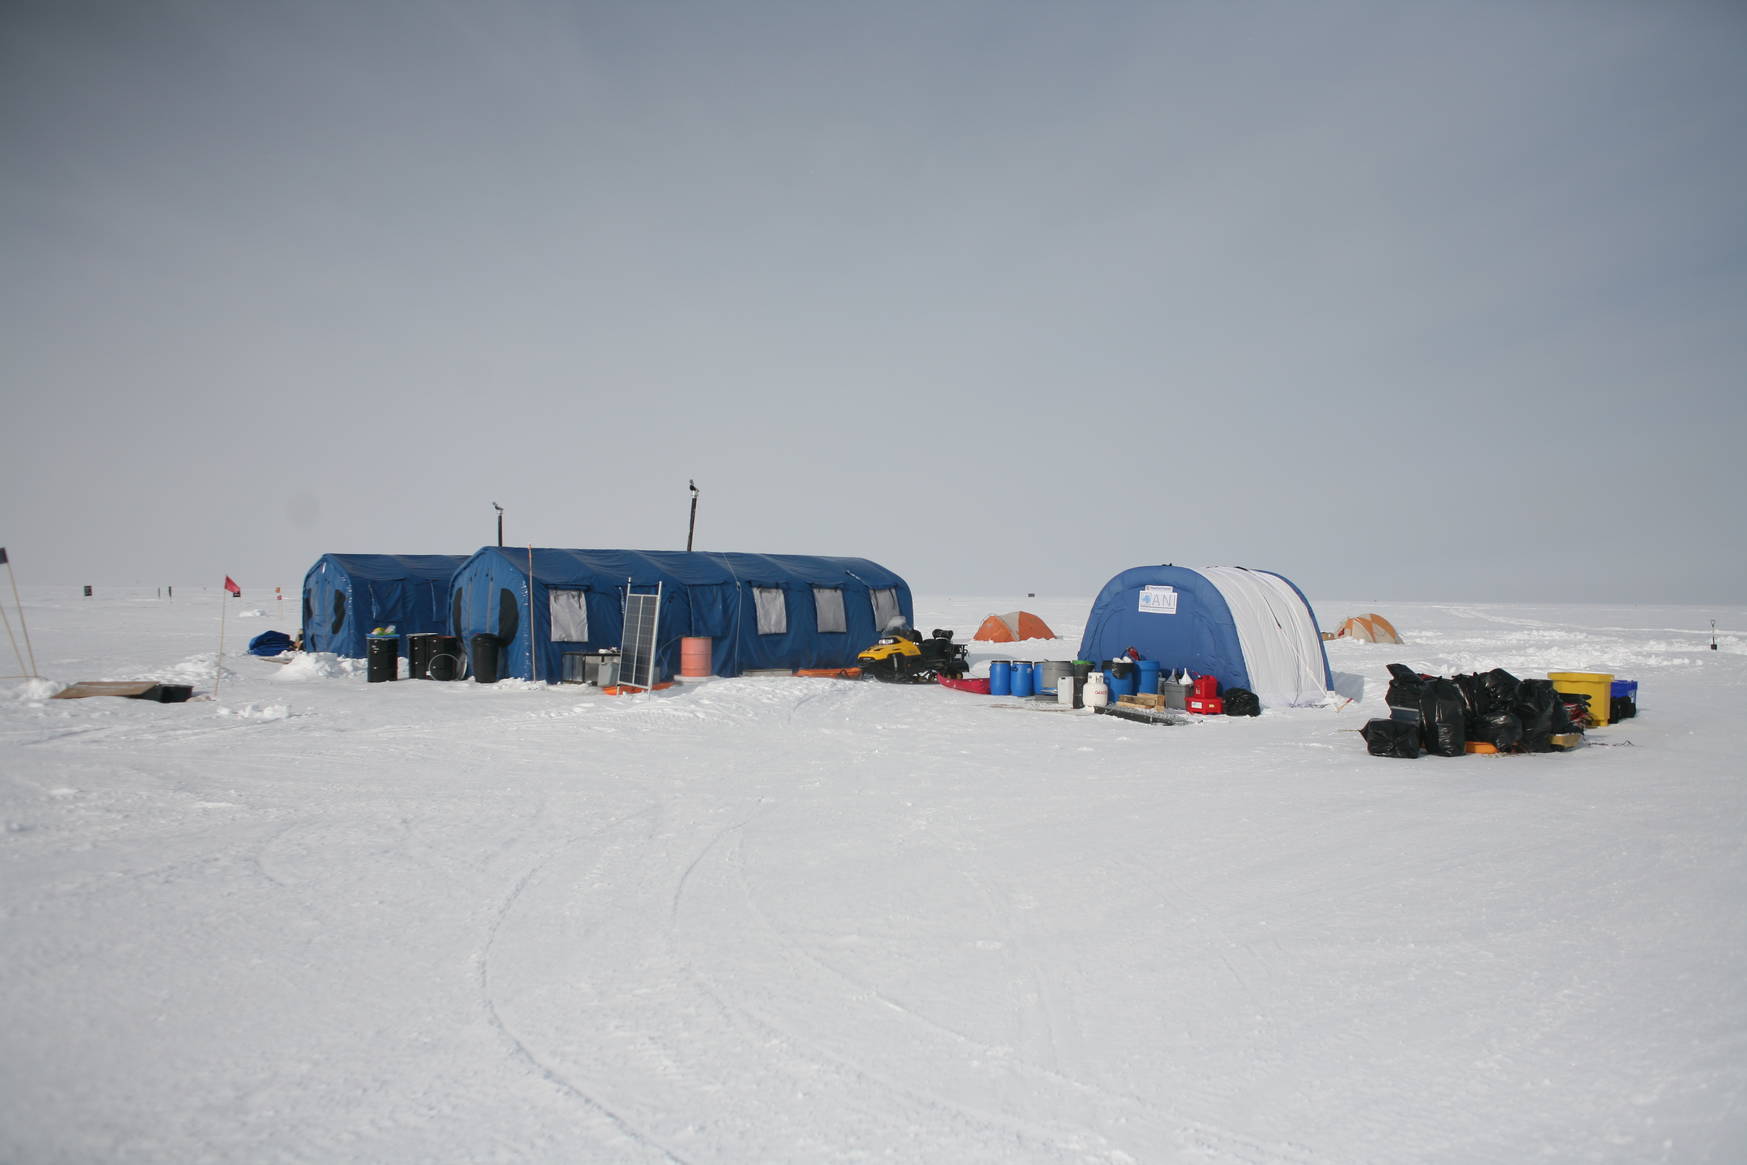 The tourist camp: three community tents (blue) containing the galley, lounge and dry toilet; in the background: tents for sleeping (orange).